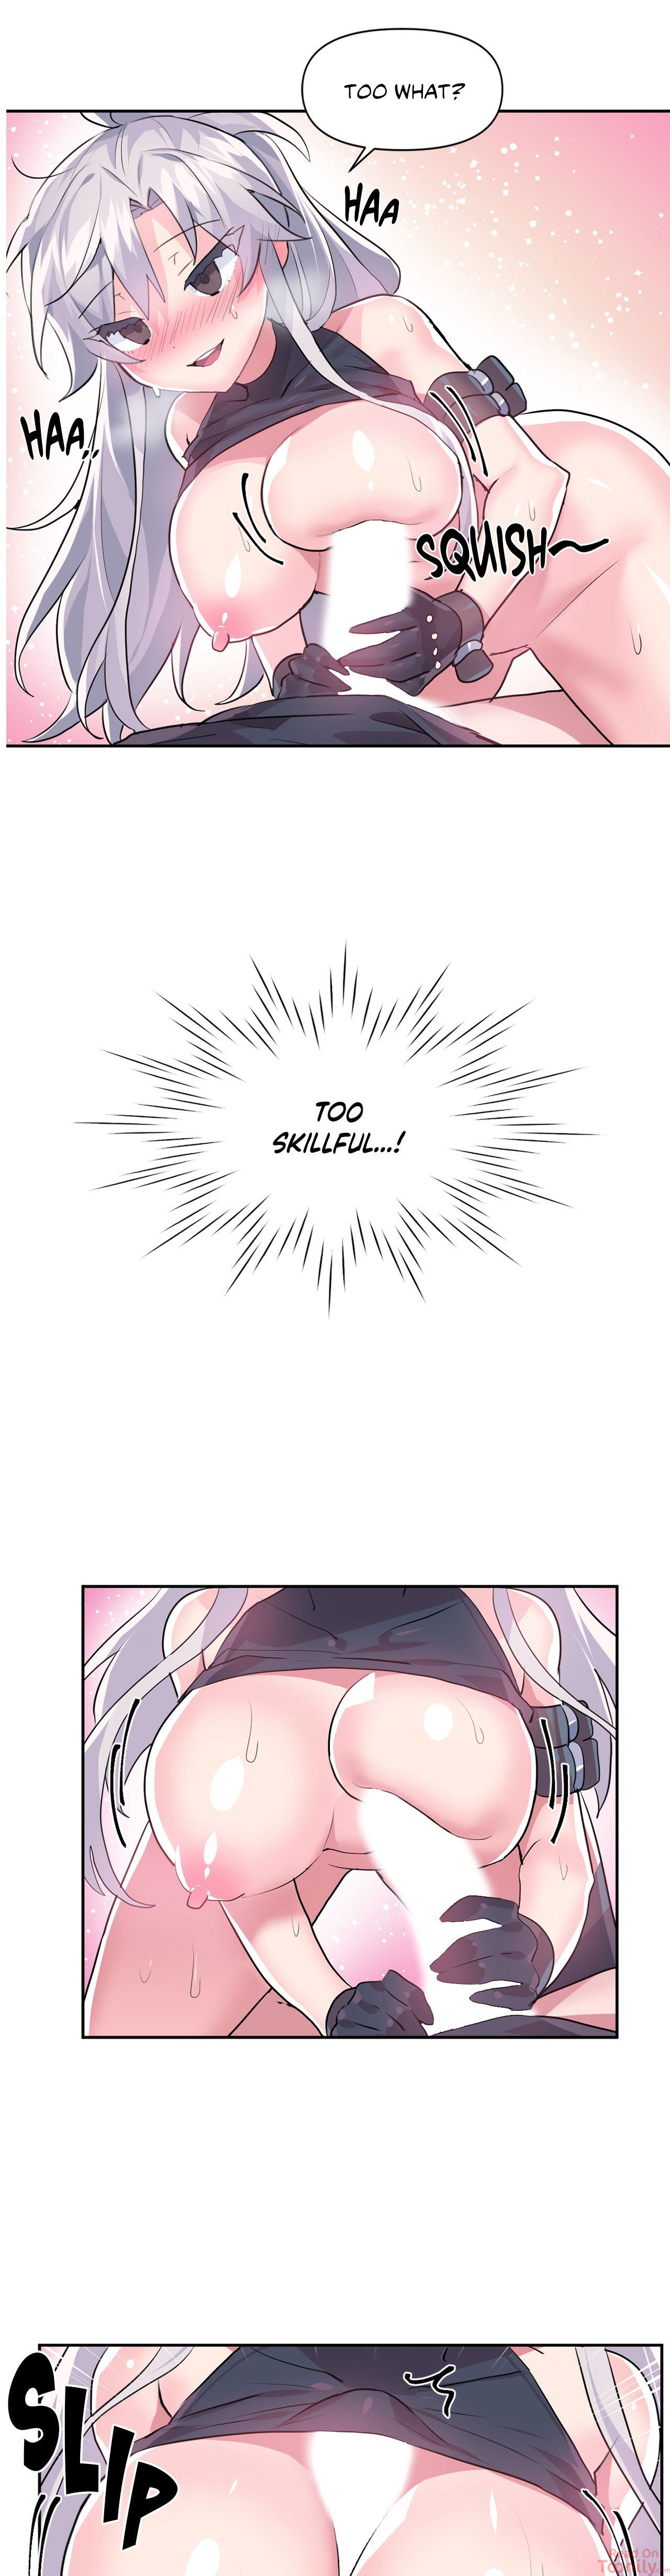 log-in-to-lust-a-land-chap-30-24